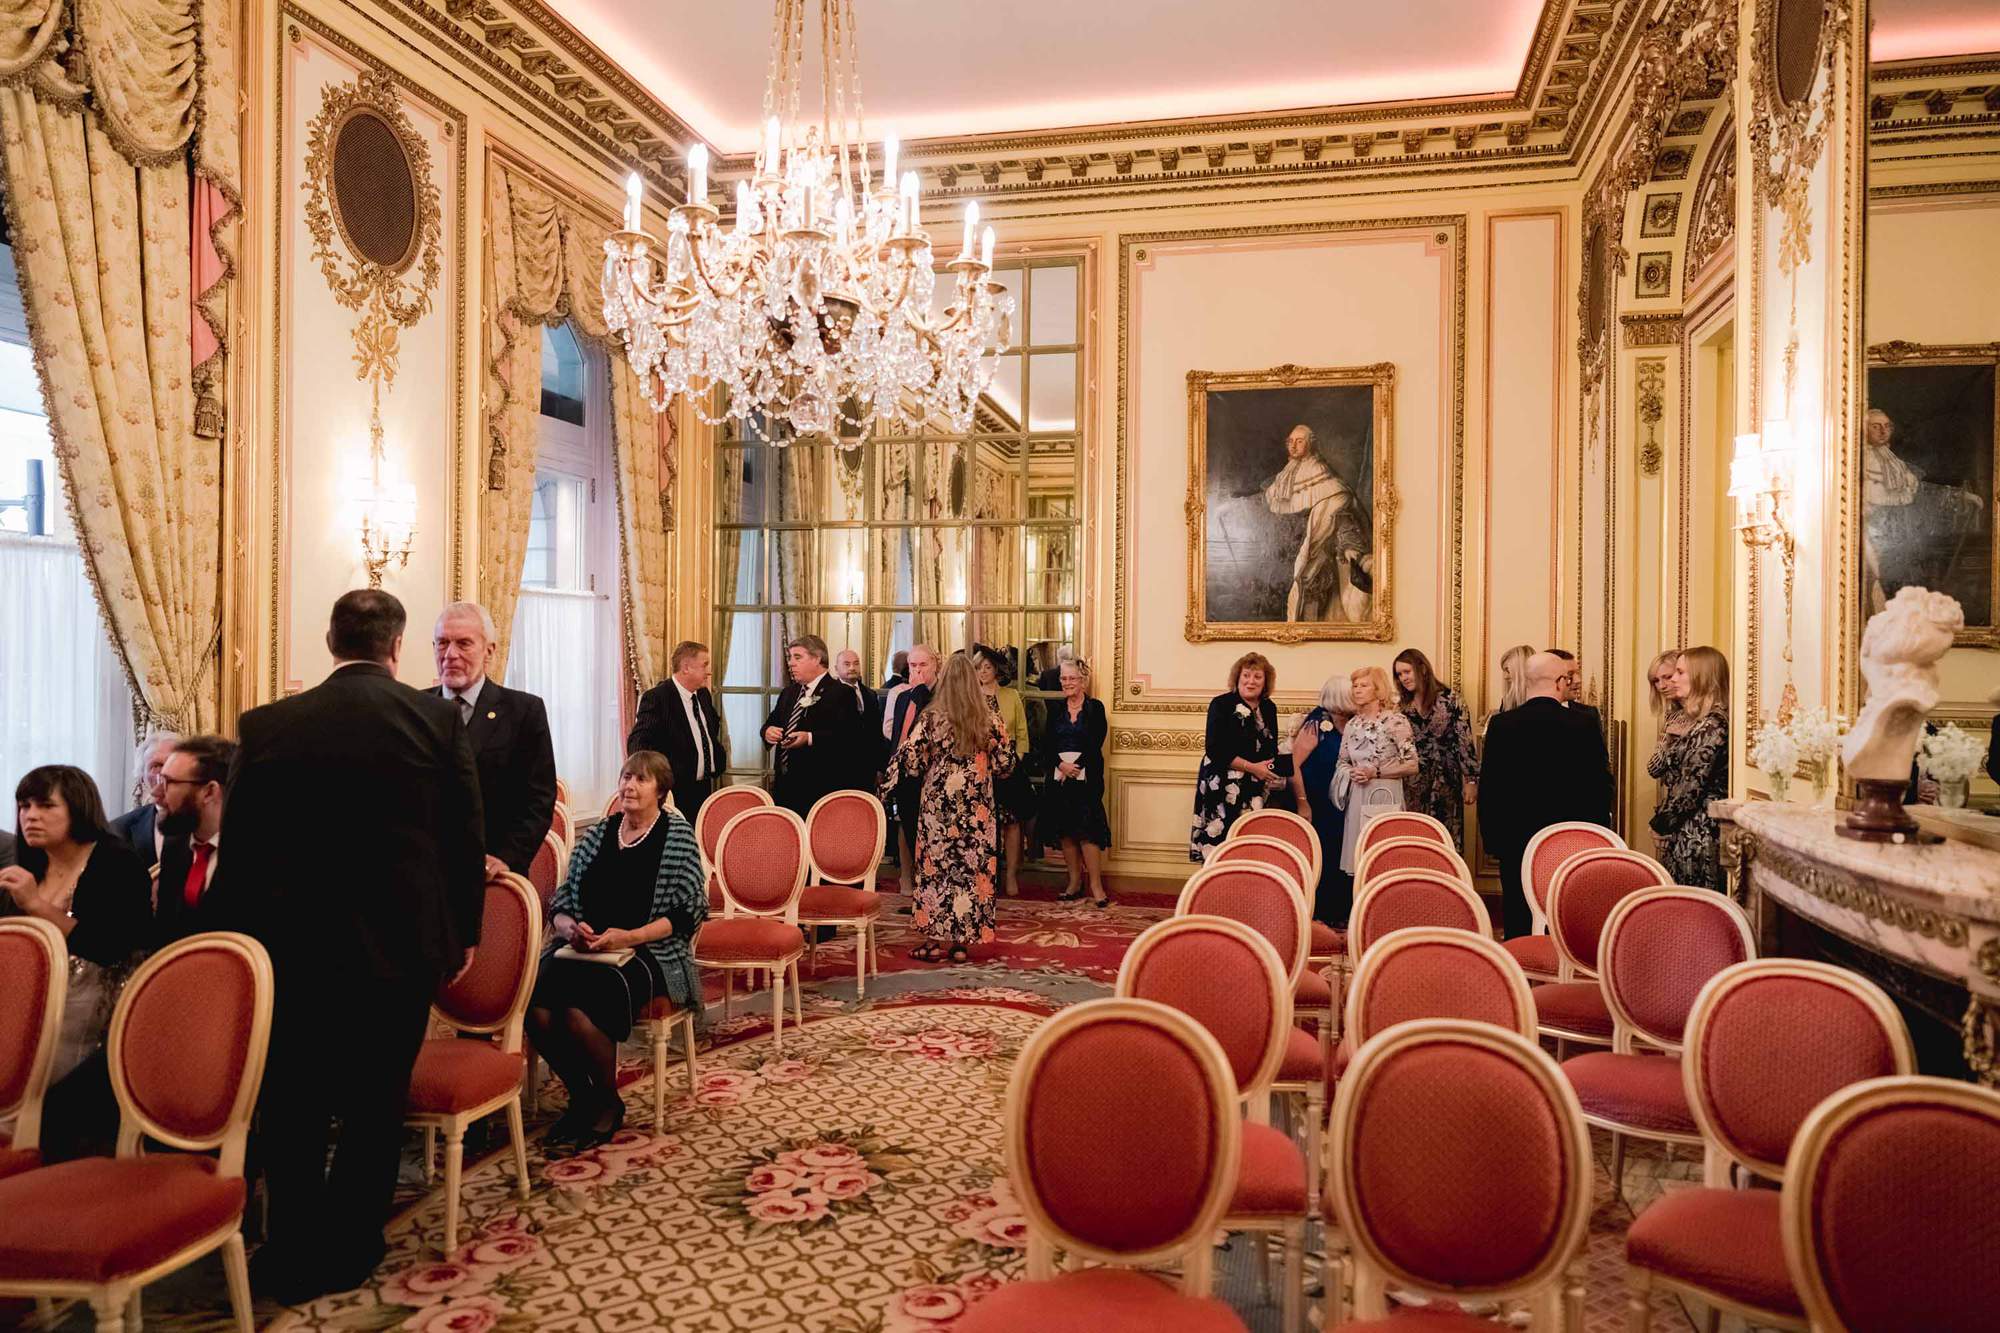 Guest gather for an intimate wedding ceremony at the Ritz in Mayfair.